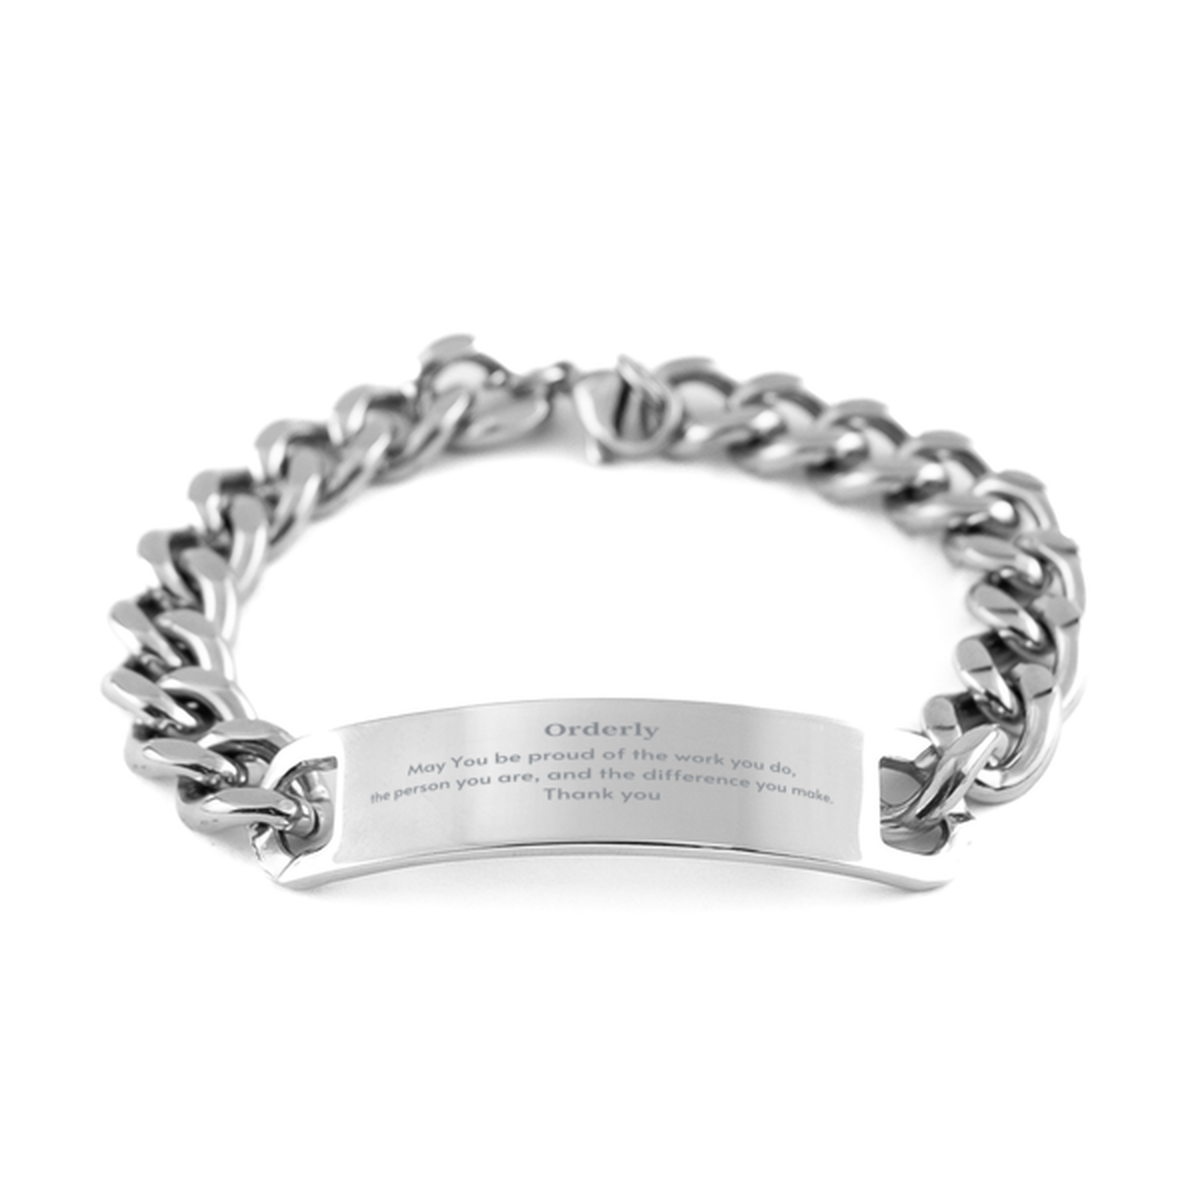 Heartwarming Cuban Chain Stainless Steel Bracelet Retirement Coworkers Gifts for Orderly, Orderly May You be proud of the work you do, the person you are Gifts for Boss Men Women Friends